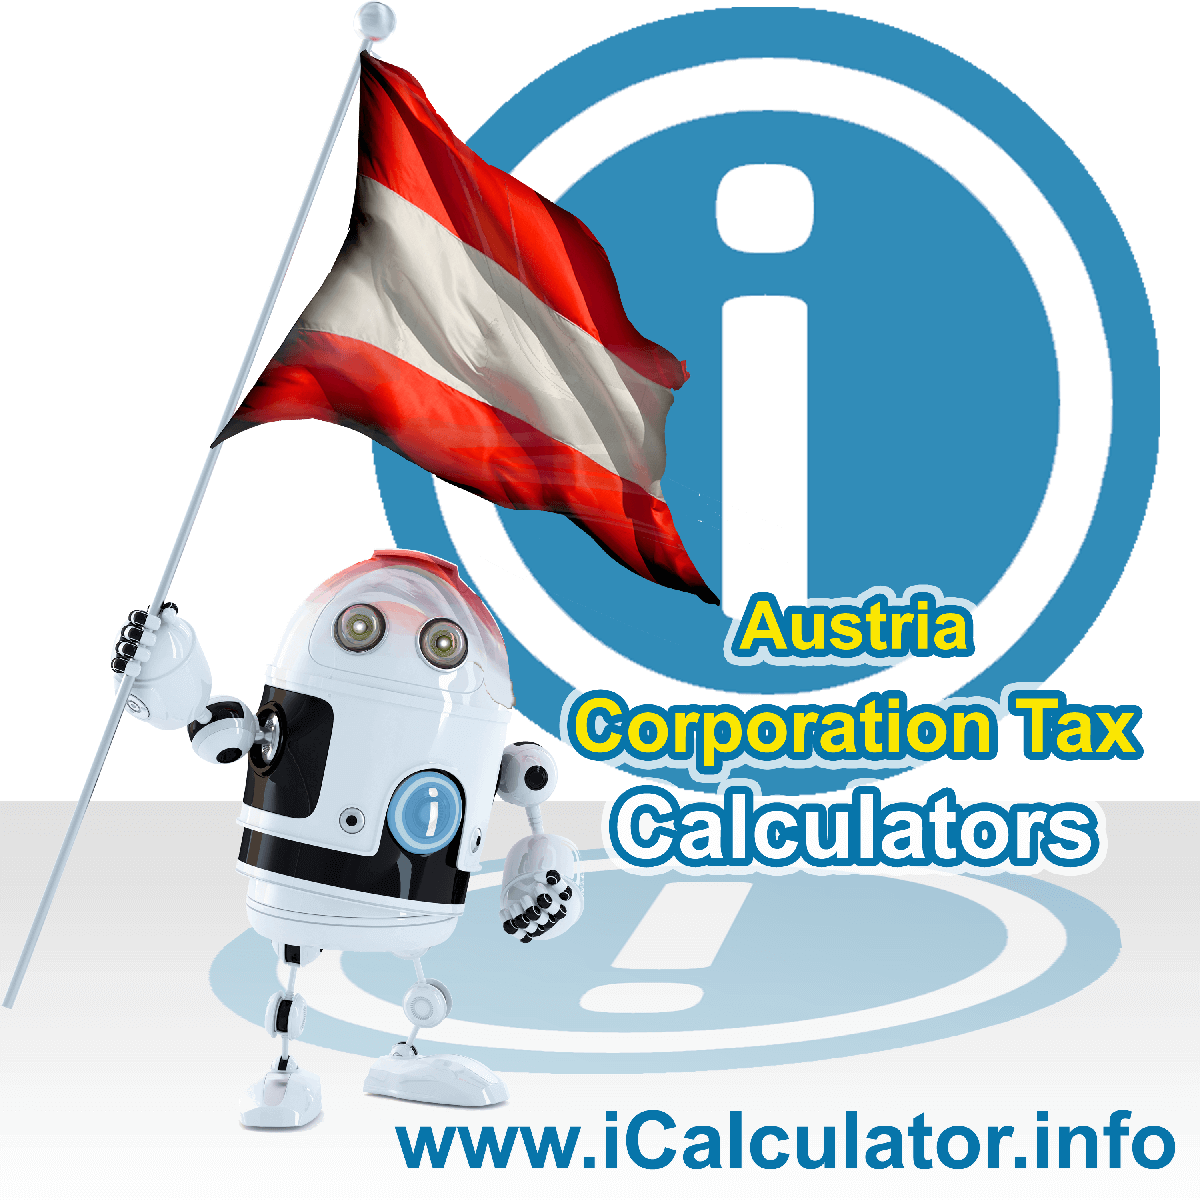 Austria Corporation Tax Calculator. This image shows the Austria flag and information relating to the corporation tax rate formula used for calculating Corporation Tax in Austria using the Austria Corporation Tax Calculator in 2023